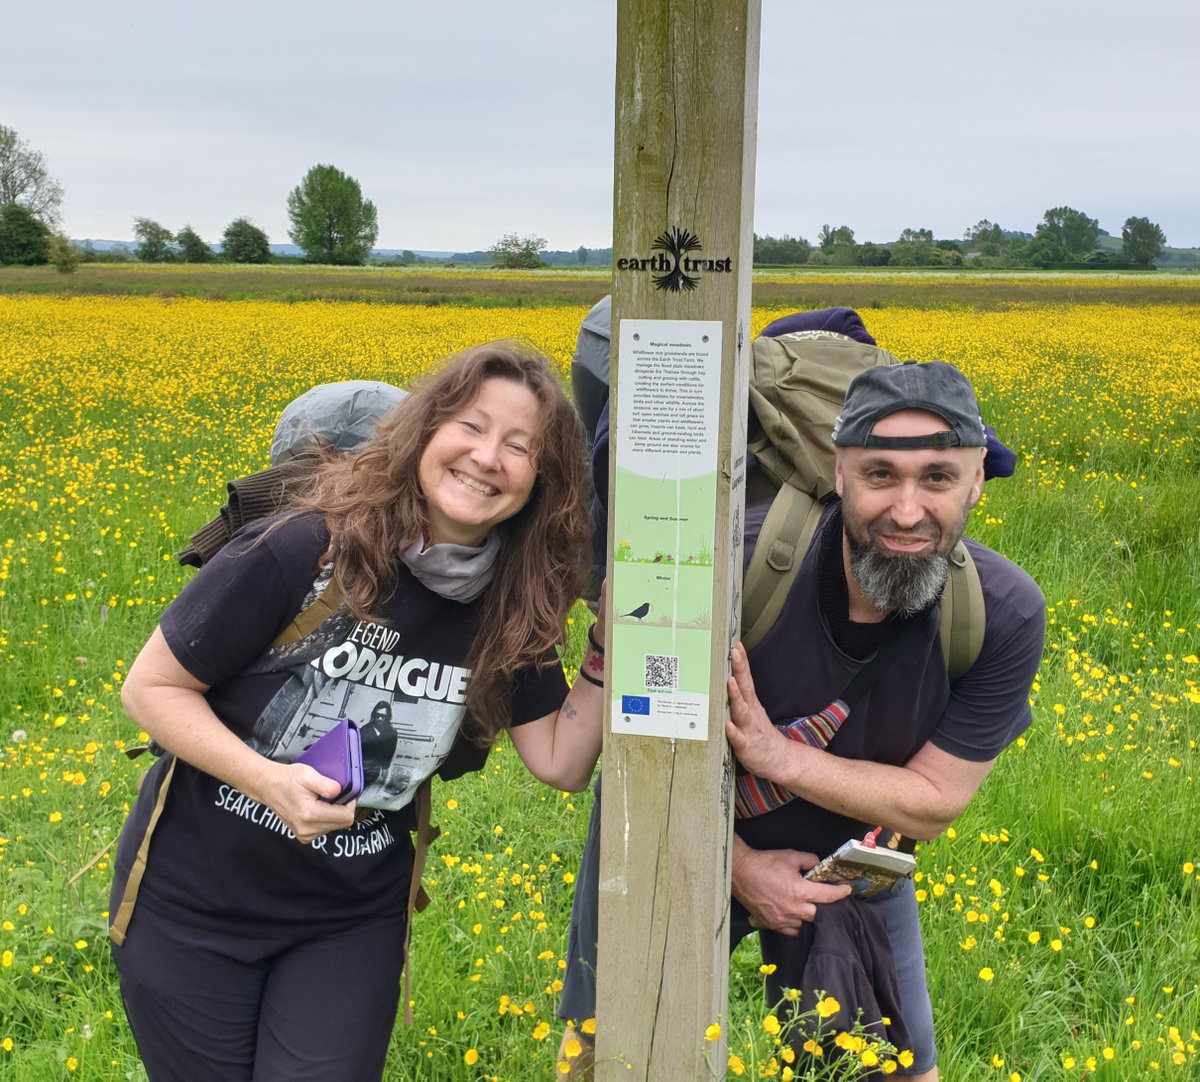 #ThamesPath hikers Stoned Olive and Raphael lovin' the buttercups on the River of Life II meadows this afternoon on their way to climb The Clumps! @earth_trust @NationalTrails @NatTrailsUK